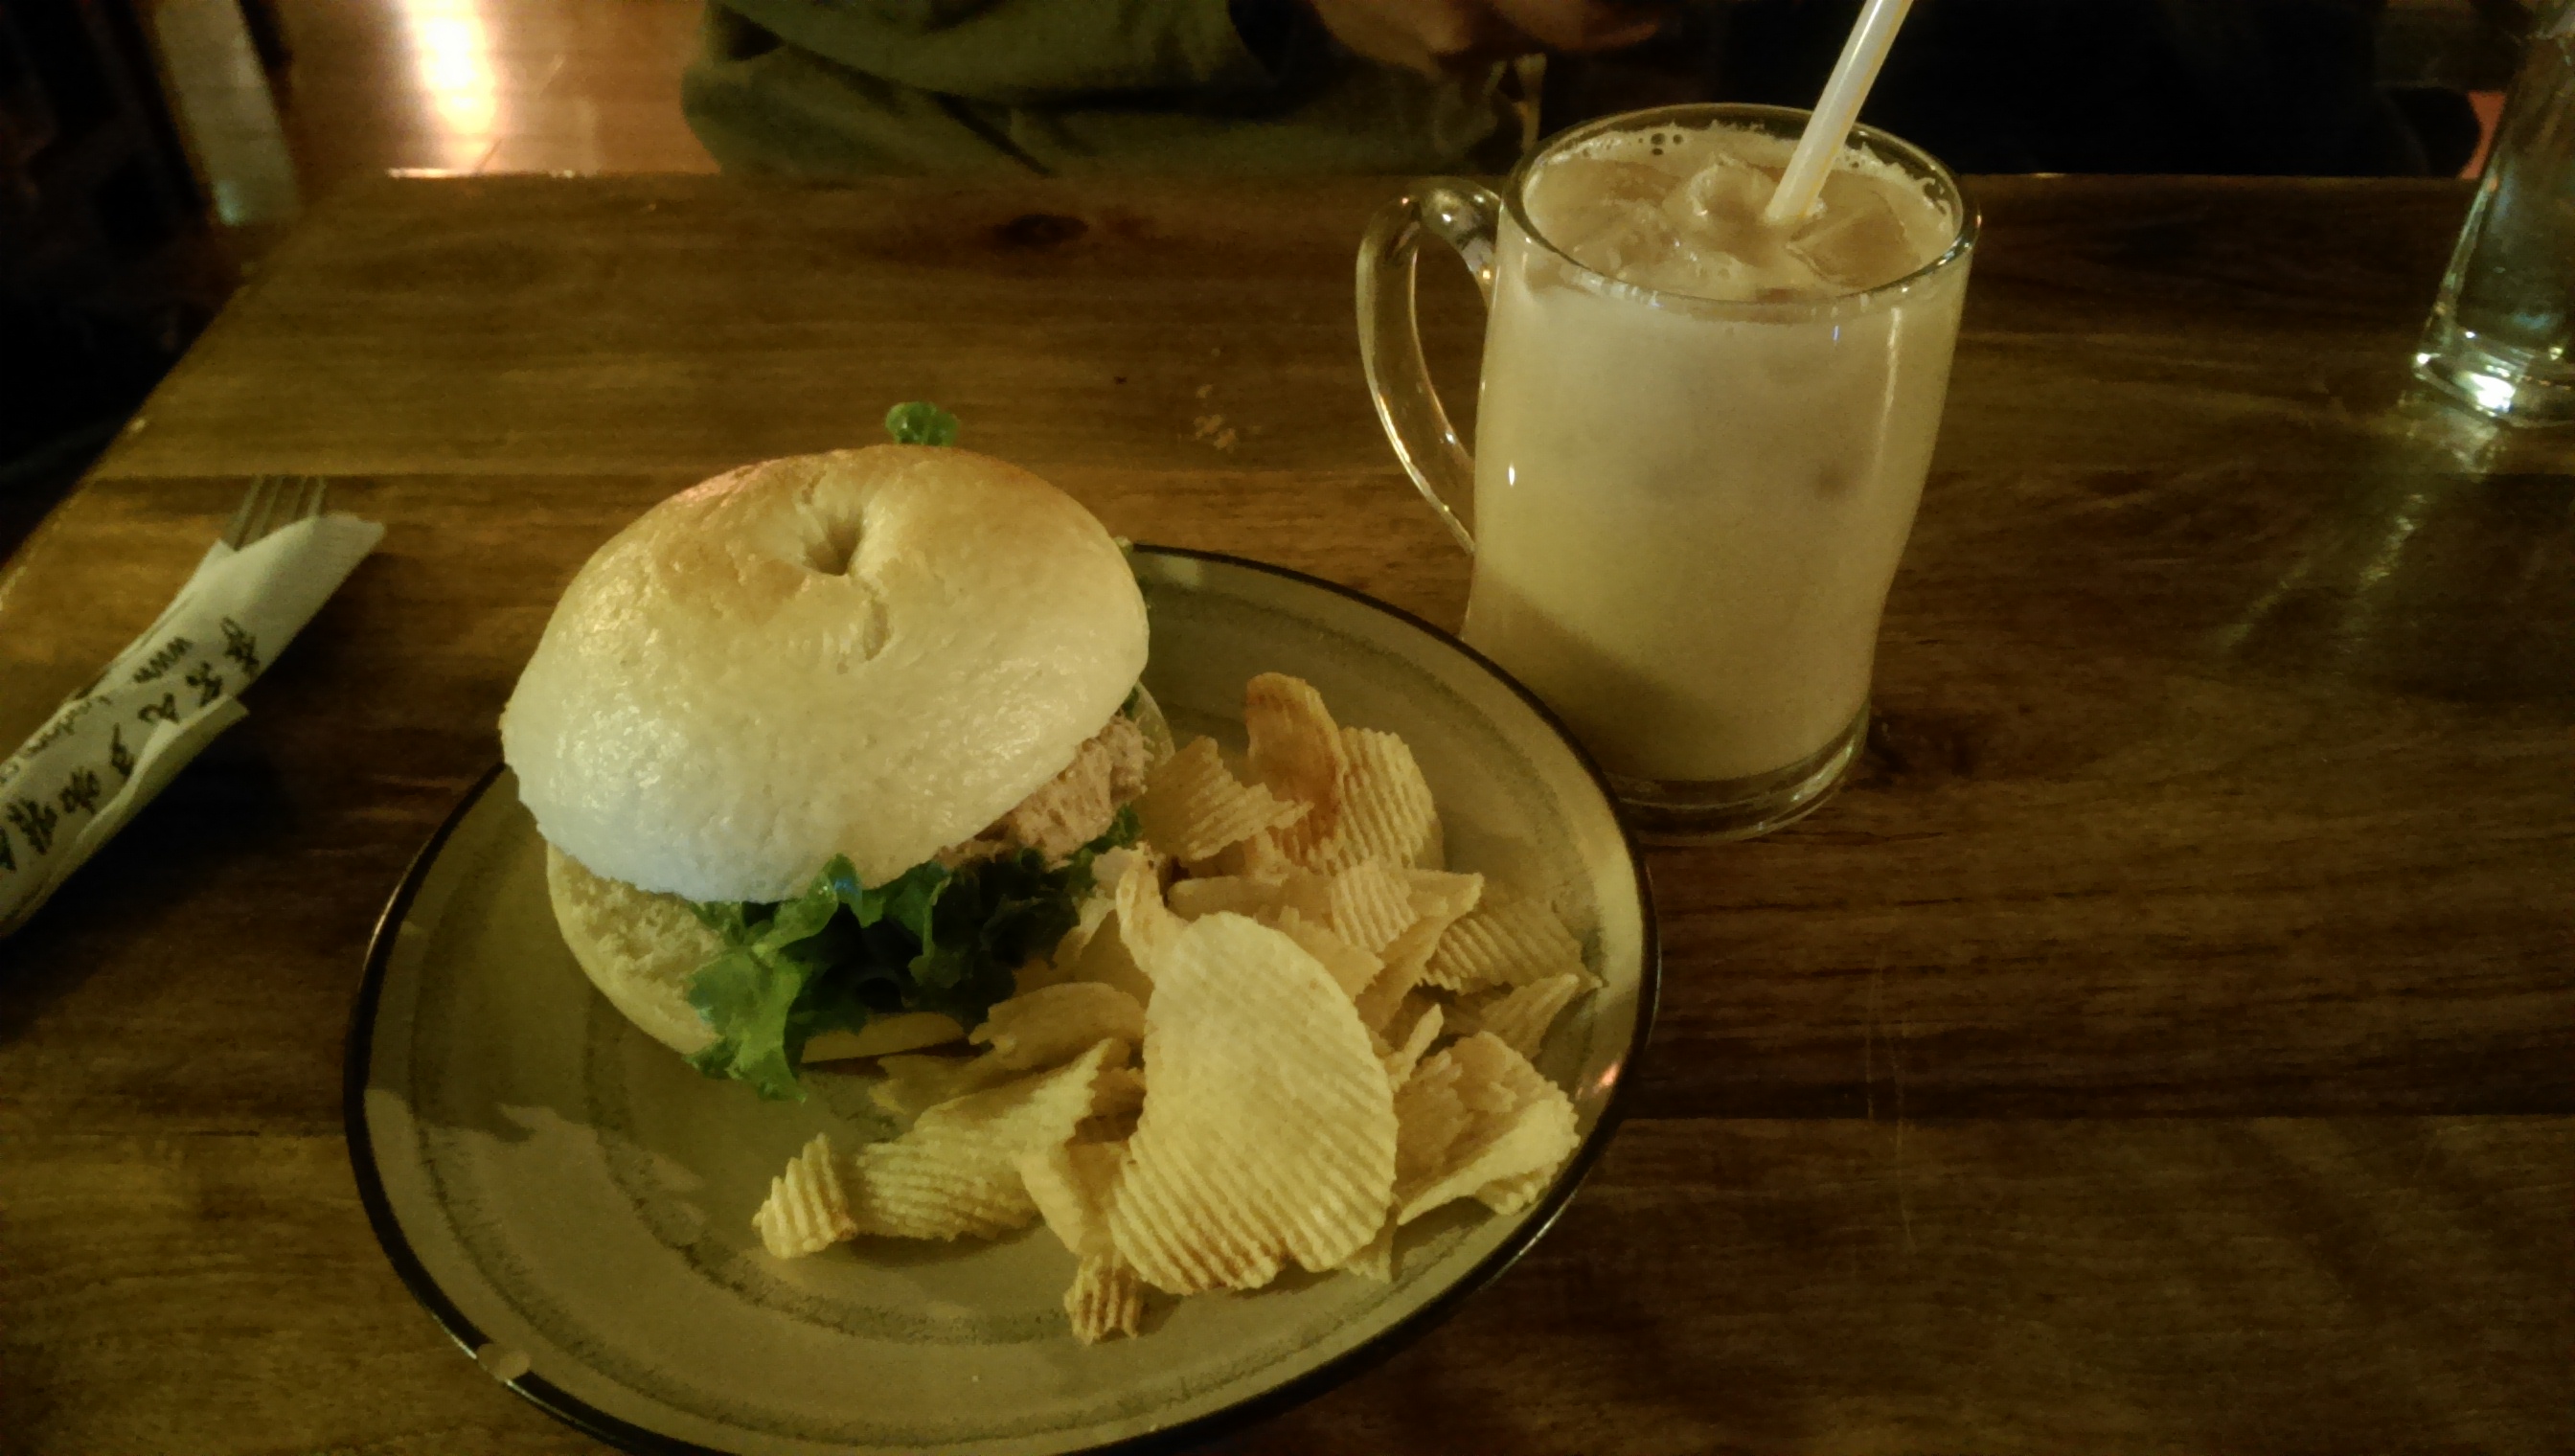 I enjoyed this fantastic tuna sandwich and potato chips, along with a Chai Latte :)